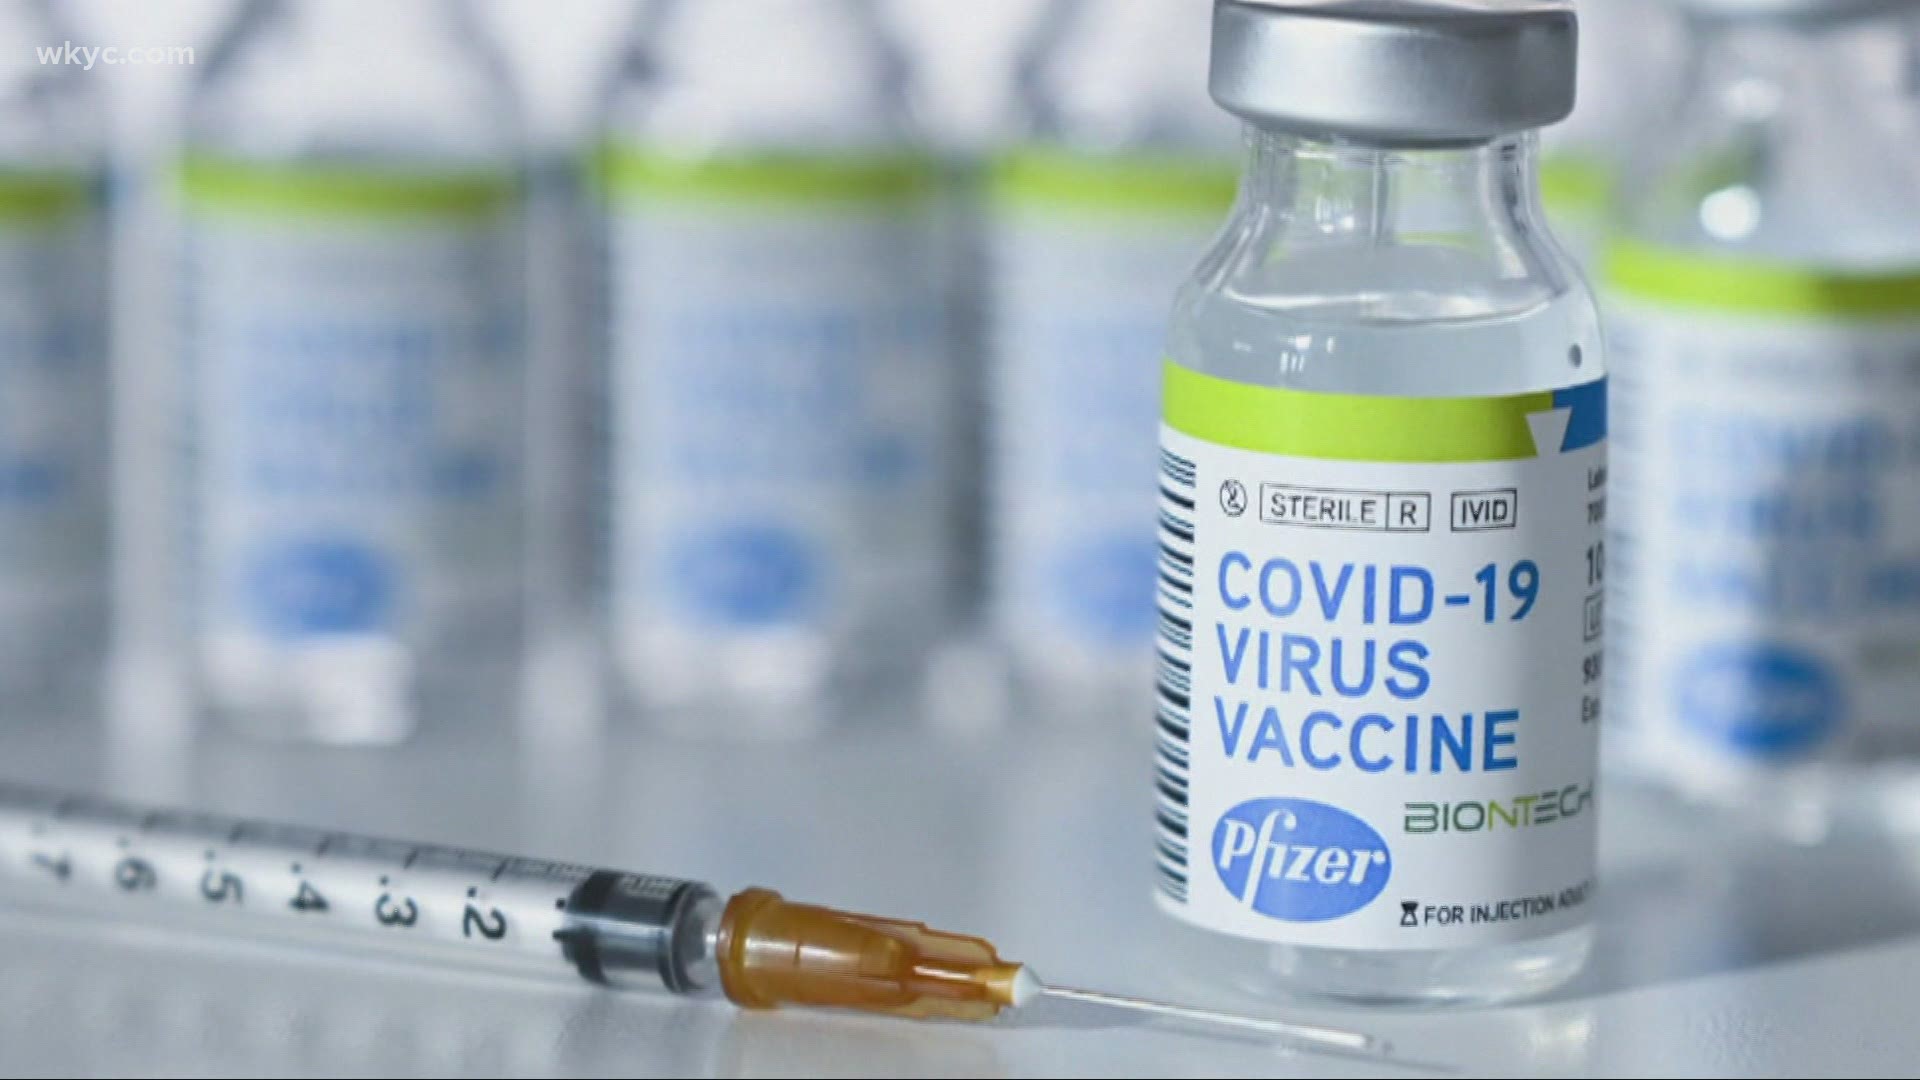 The vaccine, Bill Nye and more in today's Clicking in Cleveland. 3News' Stephanie Haney has what's trending in our area.